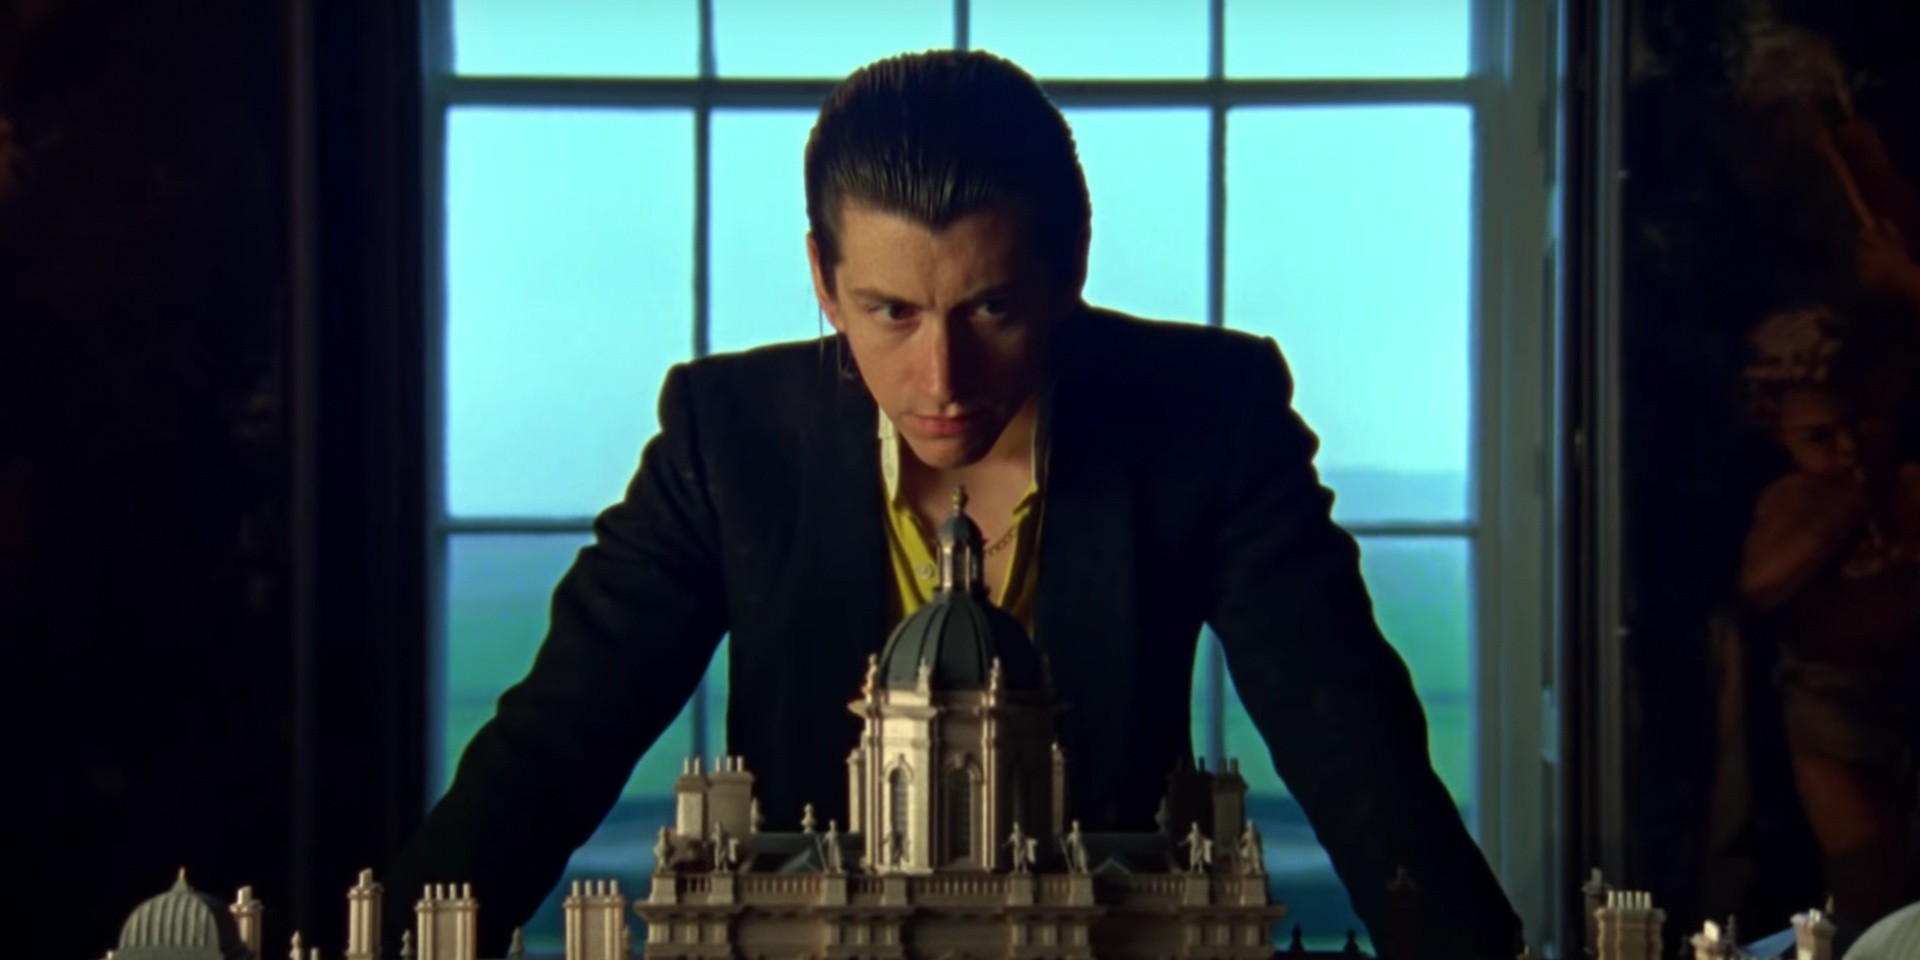 Arctic Monkeys release enigmatic new video for 'Four Out Of Five' – watch